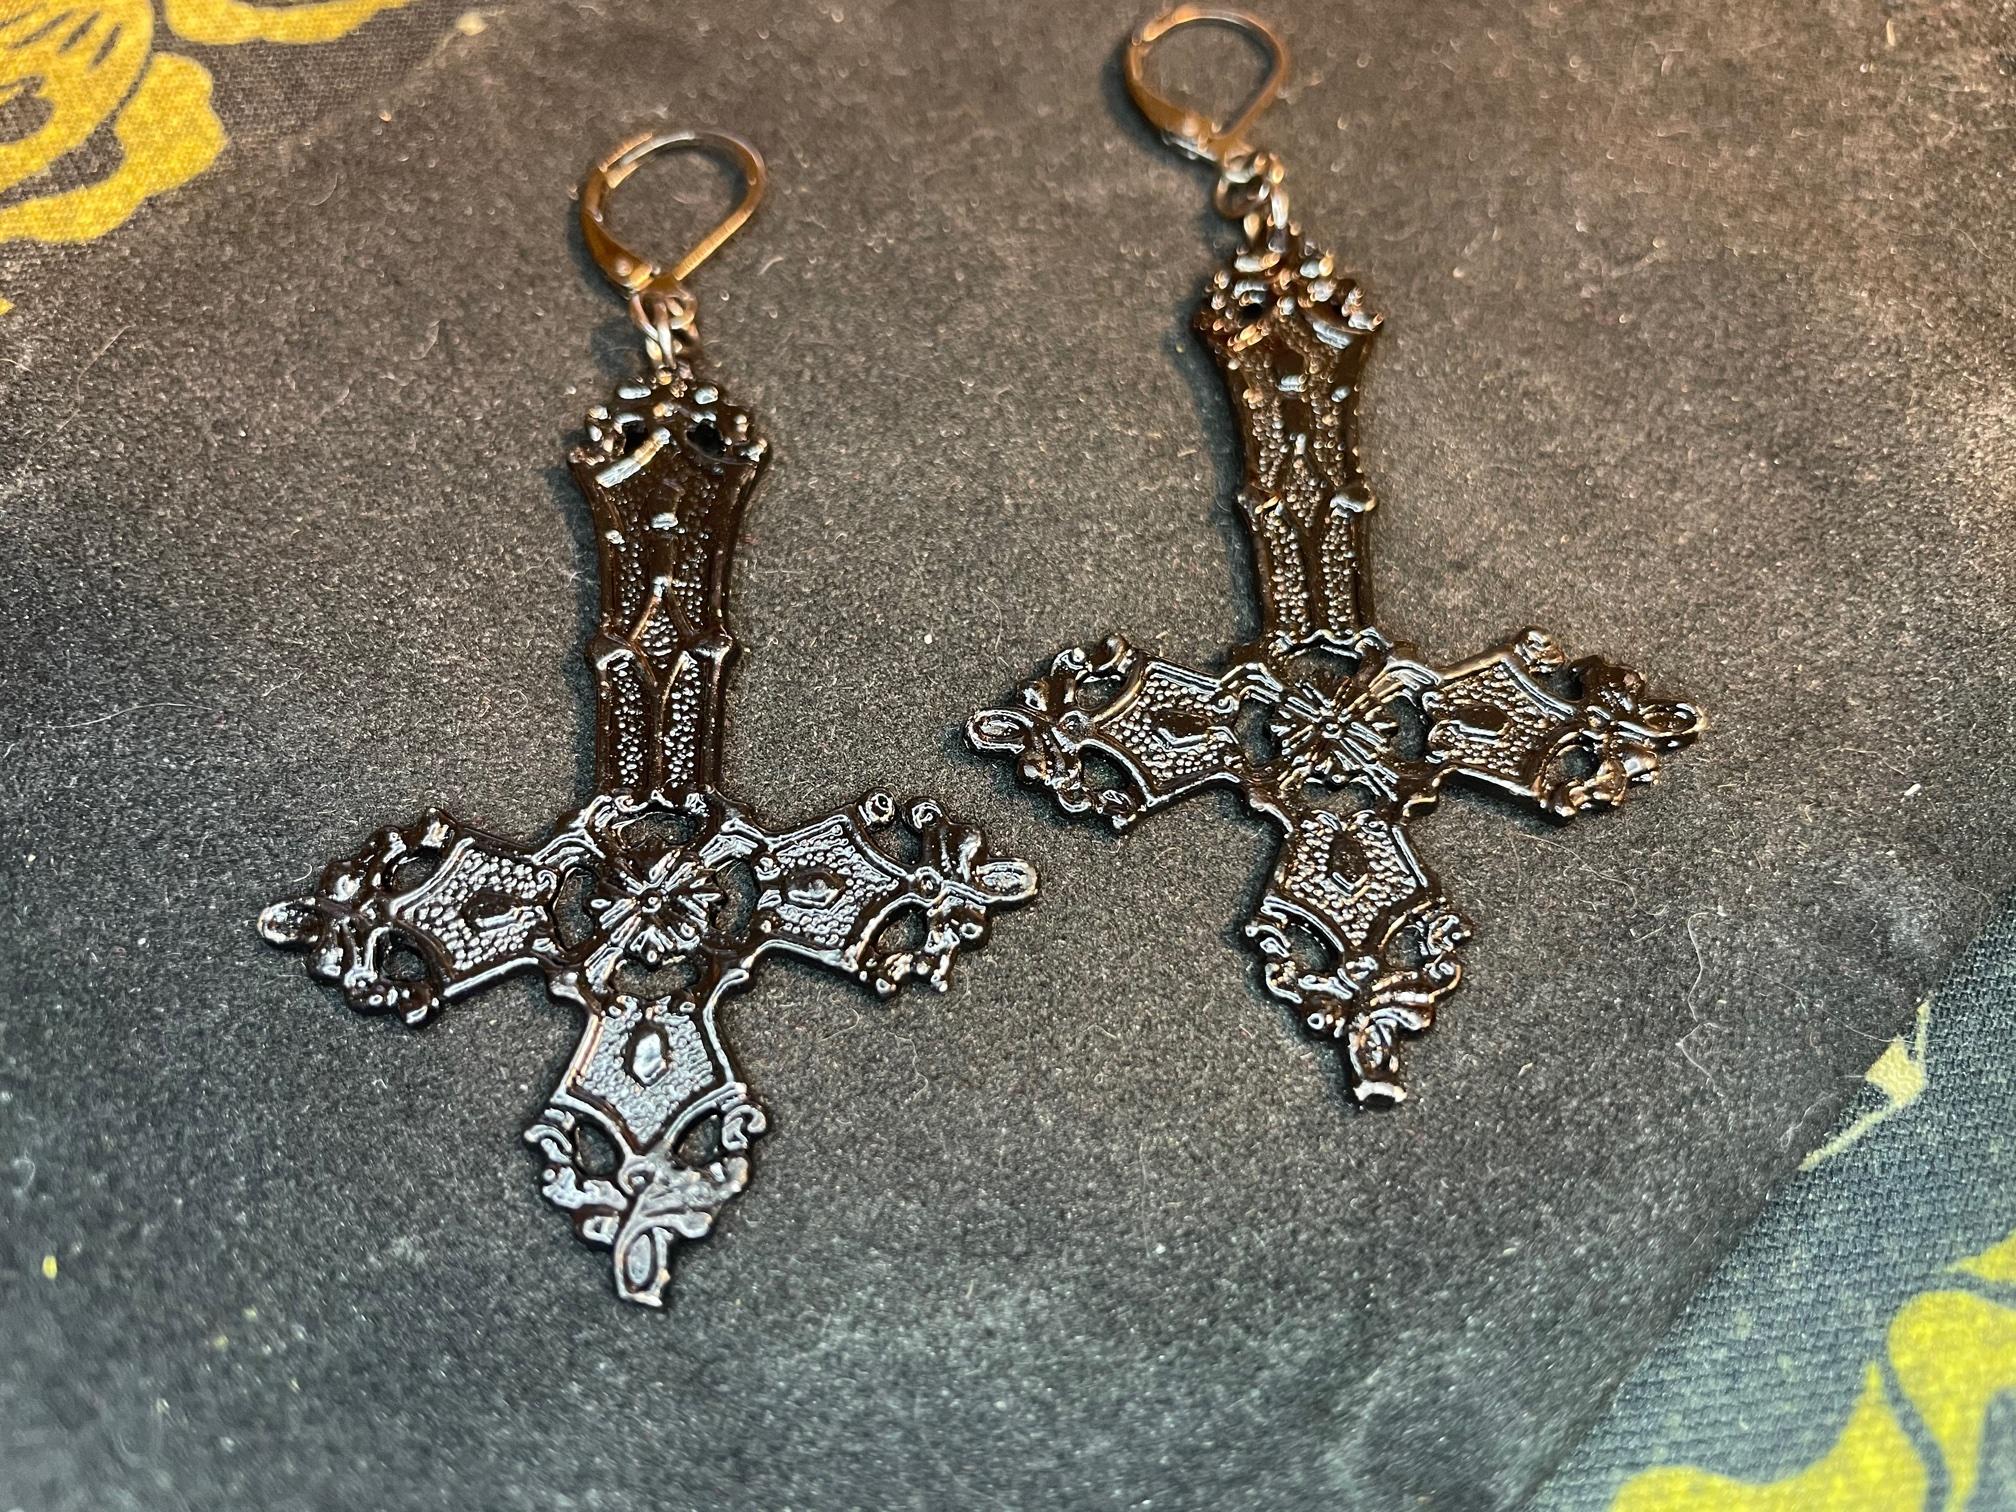 Ornate Upside Down Cross Inverted Crucifix Hand-Poured Aluminum Pendant Earrings Gothic Pagan Satanic Witchcraft Druid Wicca Black Darkness Jewelry